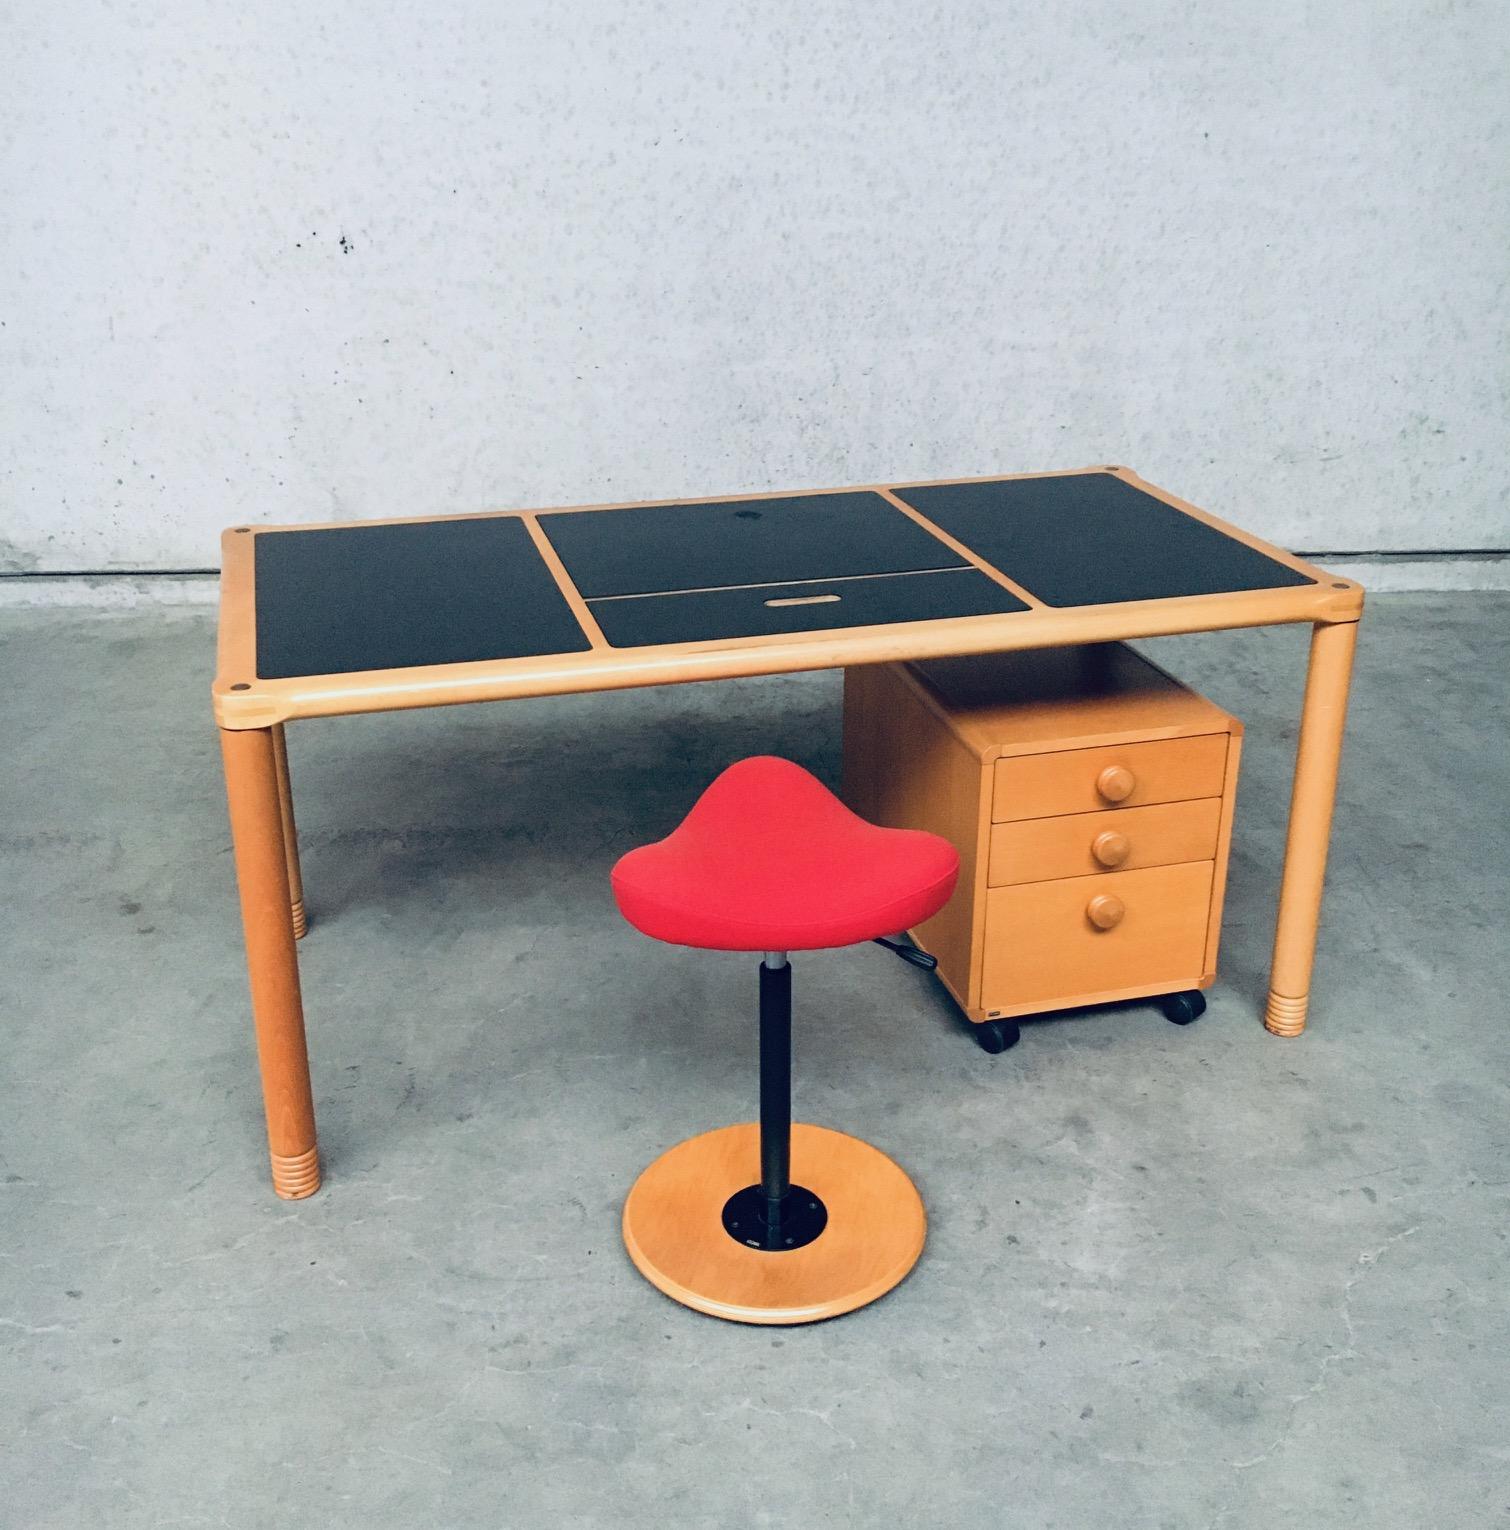 Vintage Scandinavian ergonomic design writing desk with pivoting stool, made by Stokke, Norway 1980's. Ergonomical designed writing desk with black inlay and middle reading section wich can be altered in angle for easy reading. This middel piece can